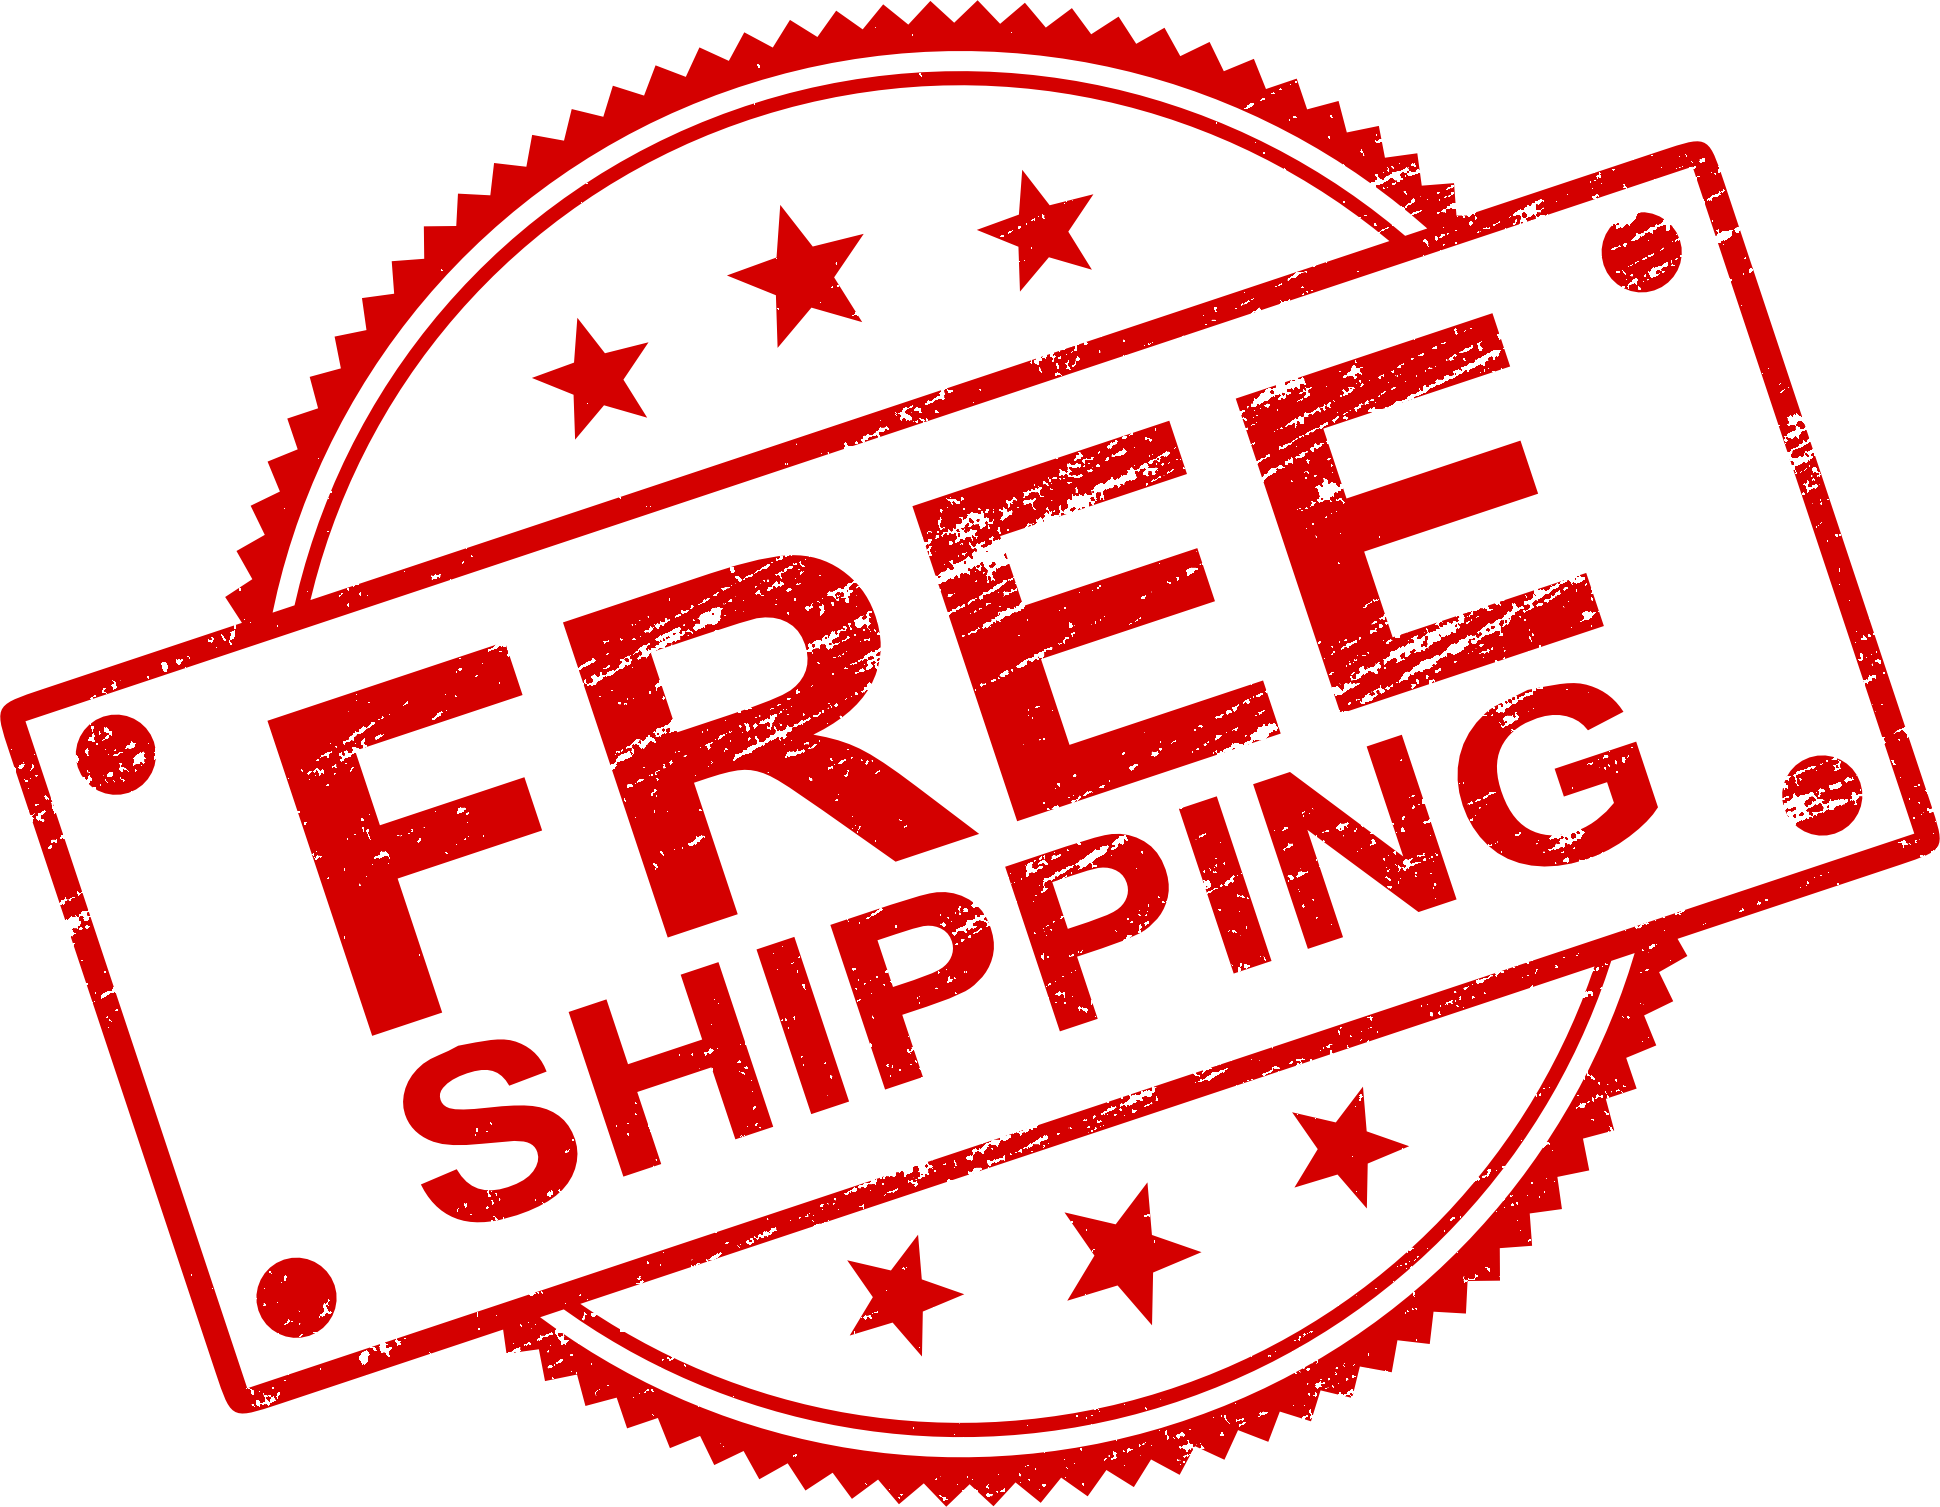 Free Shipping PNG Image